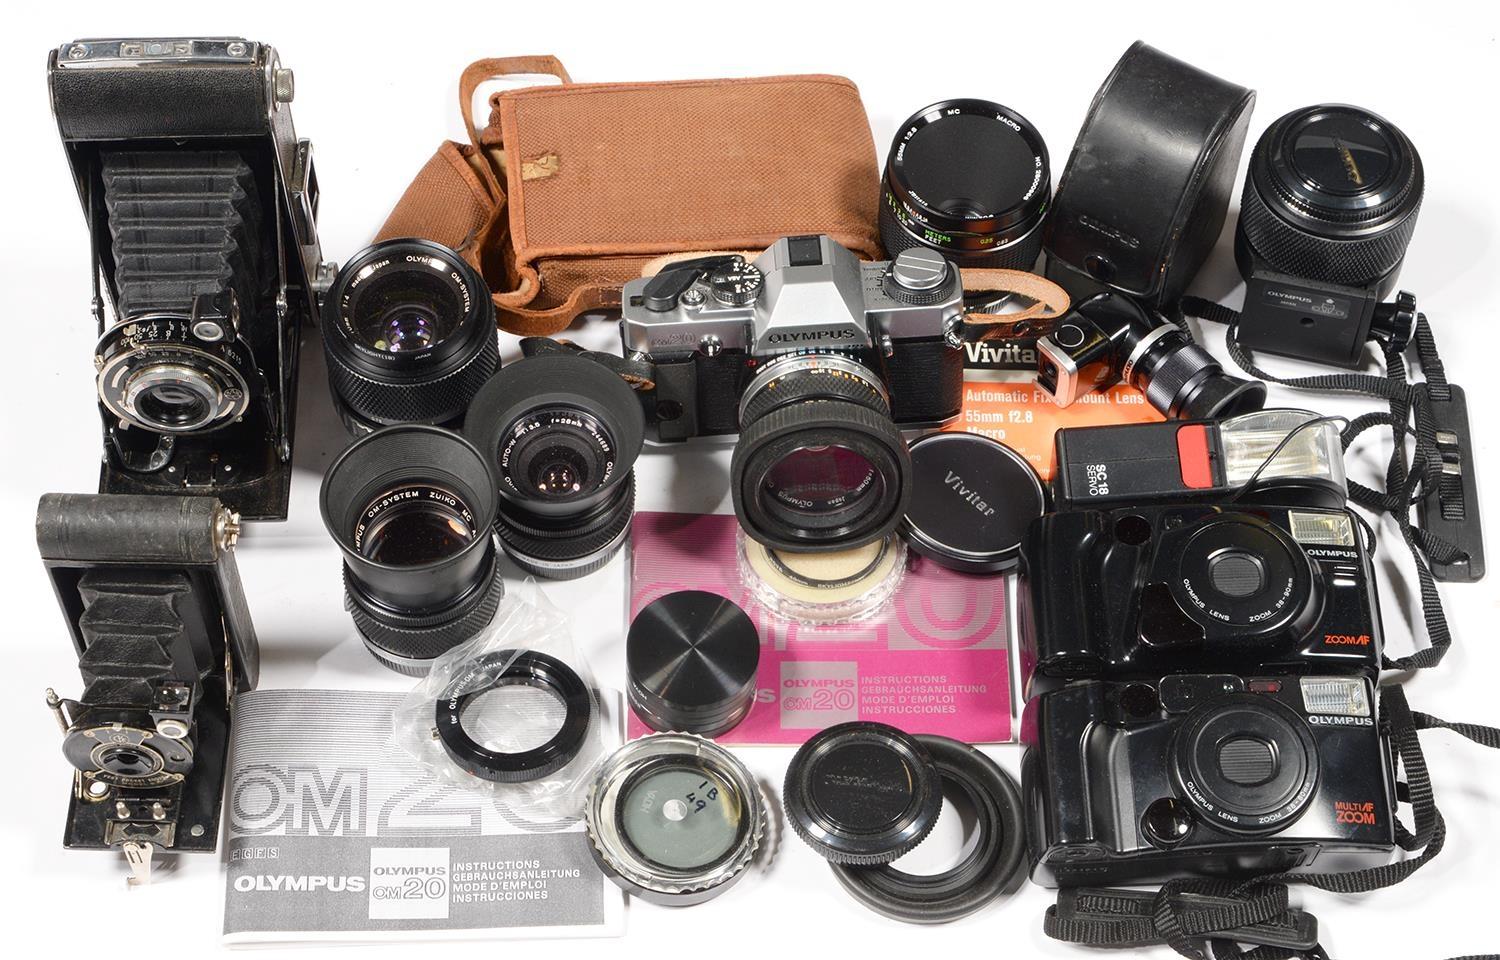 AN OLYMPUS OM20 35MM SLR CAMERA OUTFIT, VARIOUS OTHER CAMERAS, INCLUDING EARLIER 1930'S ENSIGN